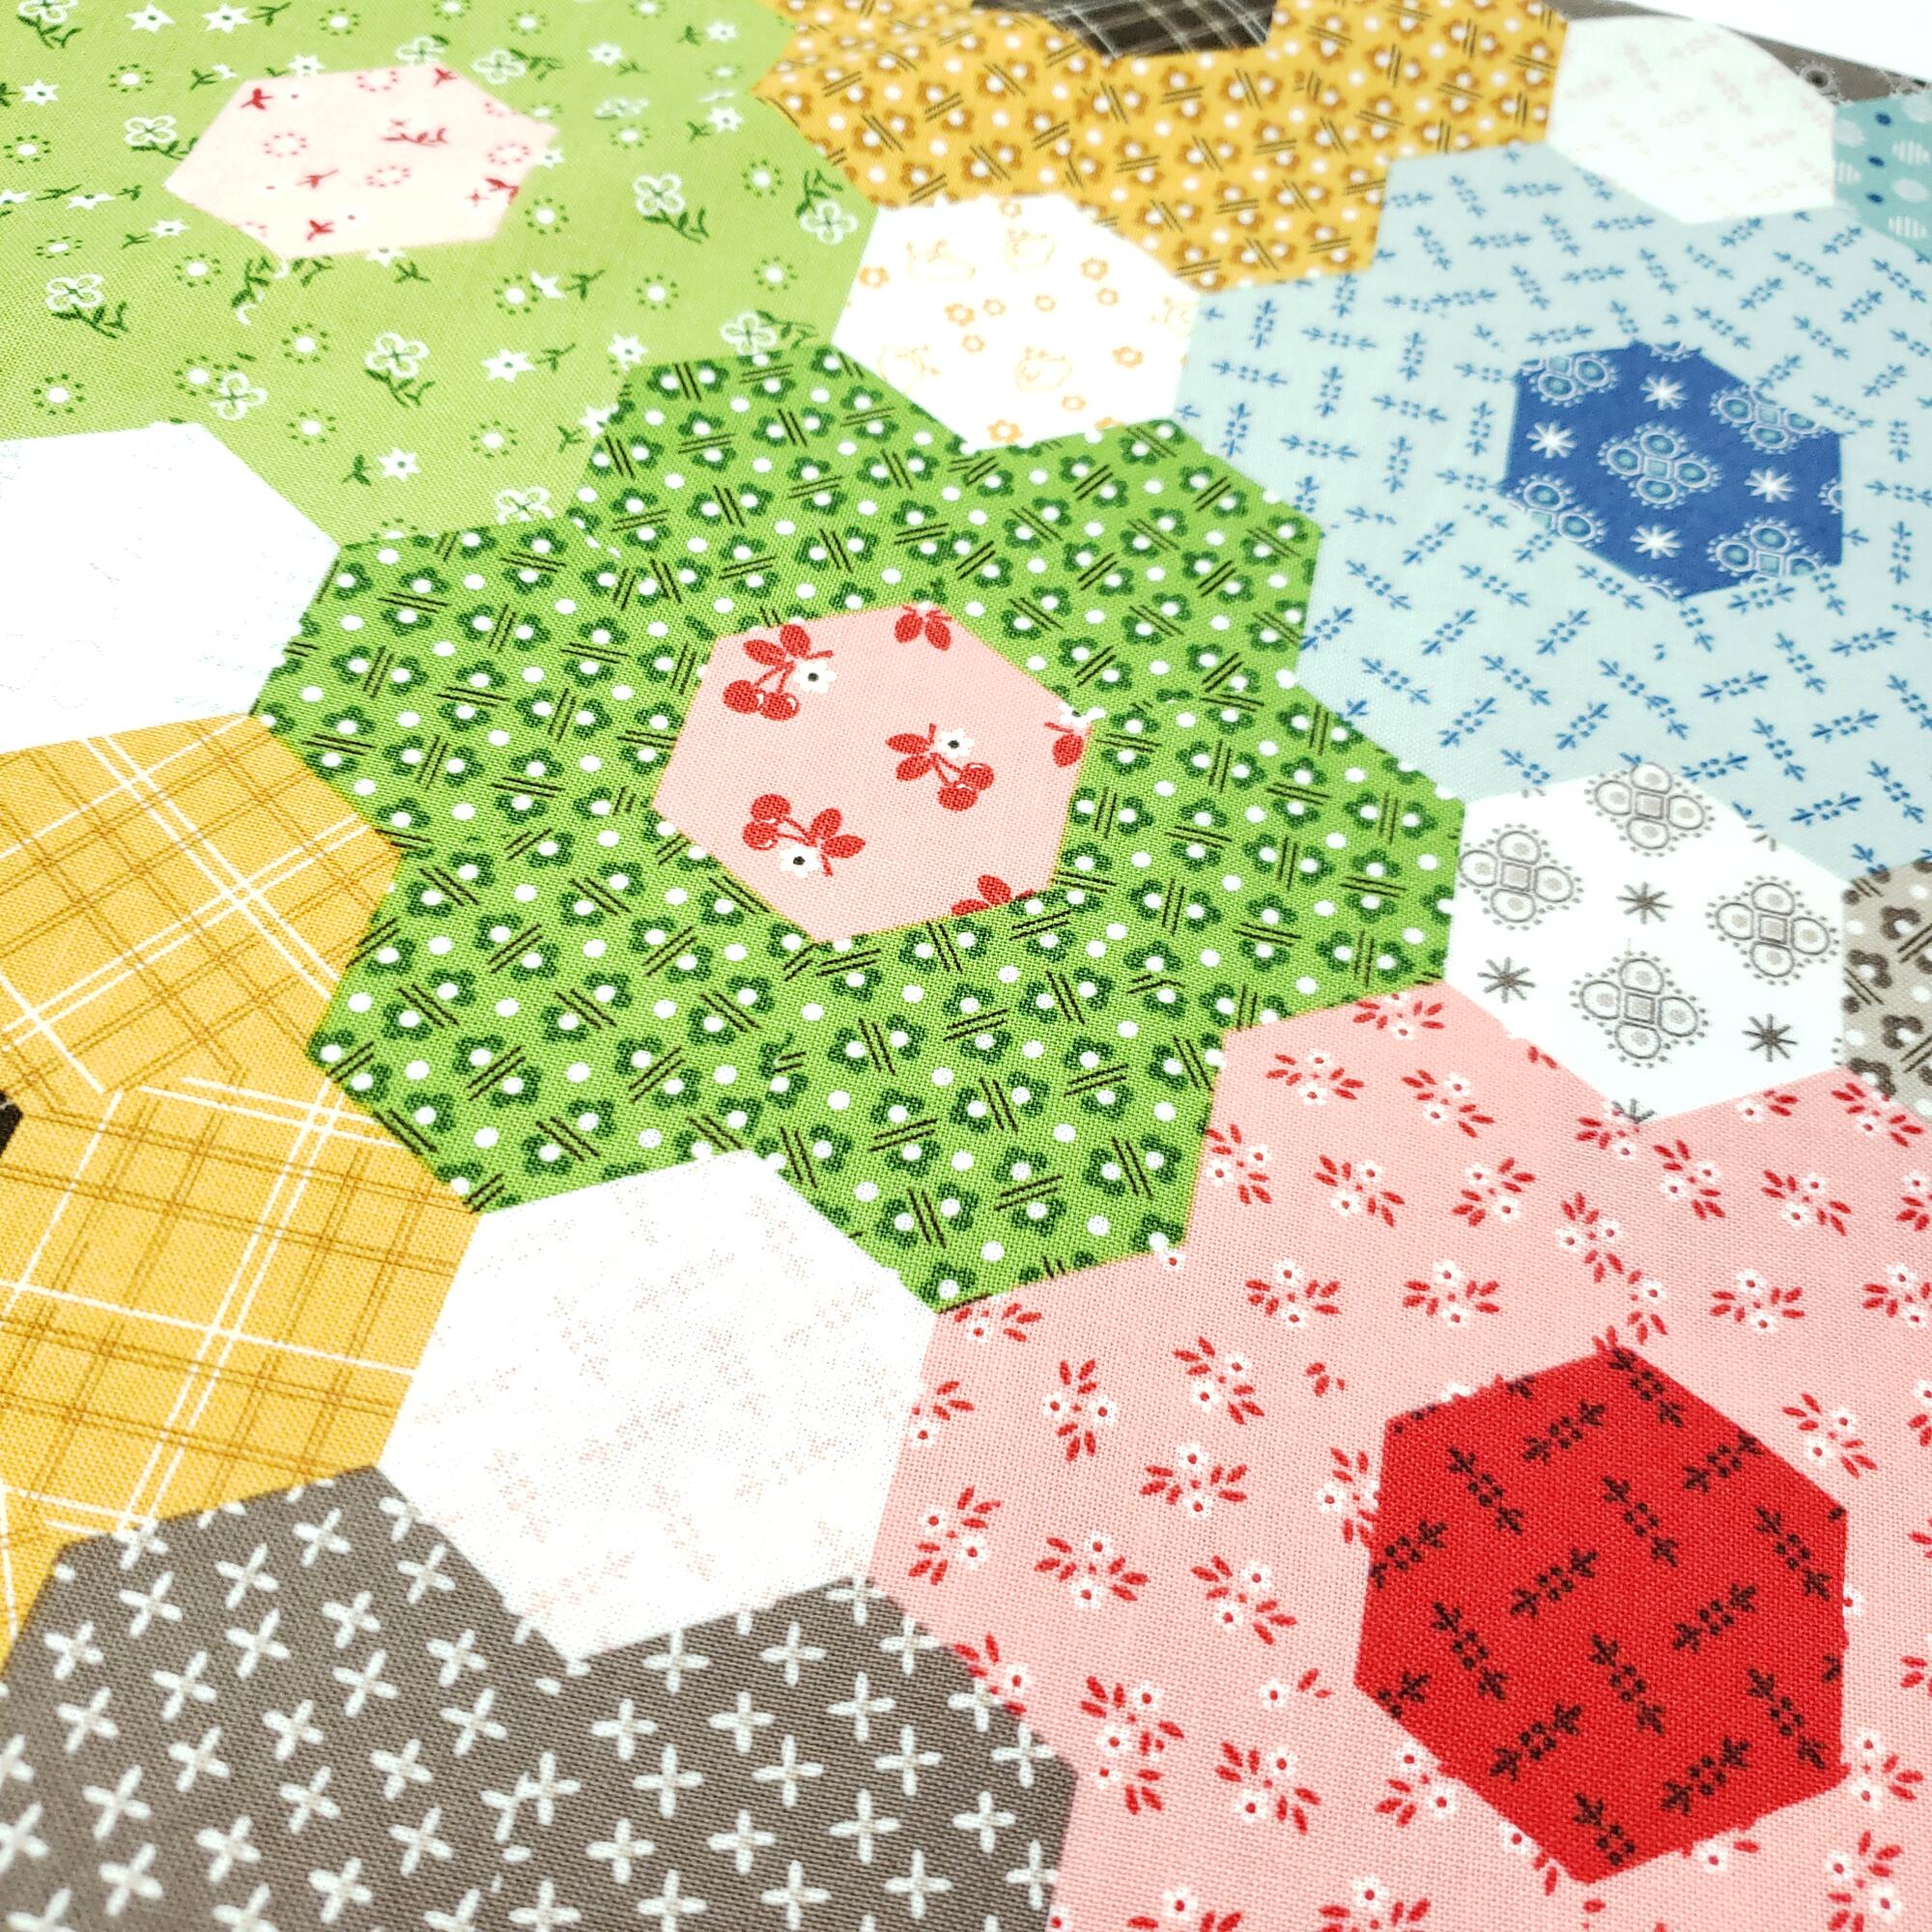 riley blake,calico,color,cheater,patchwork, hexies,hexagons,cotton,patchwork,quilt,granny